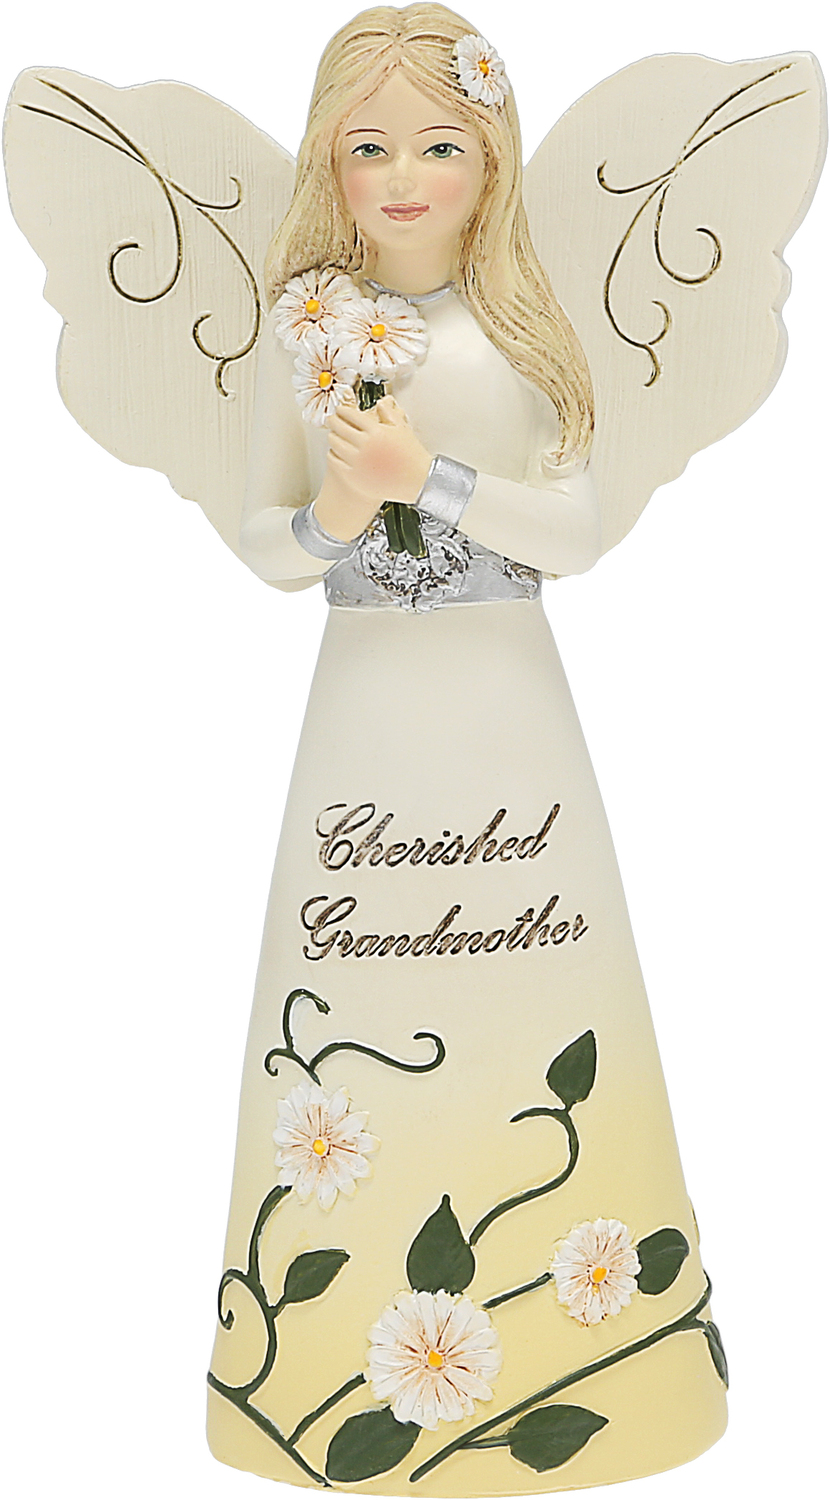 Grandmother by Elements - Grandmother - 5" Angel Holding Daisies